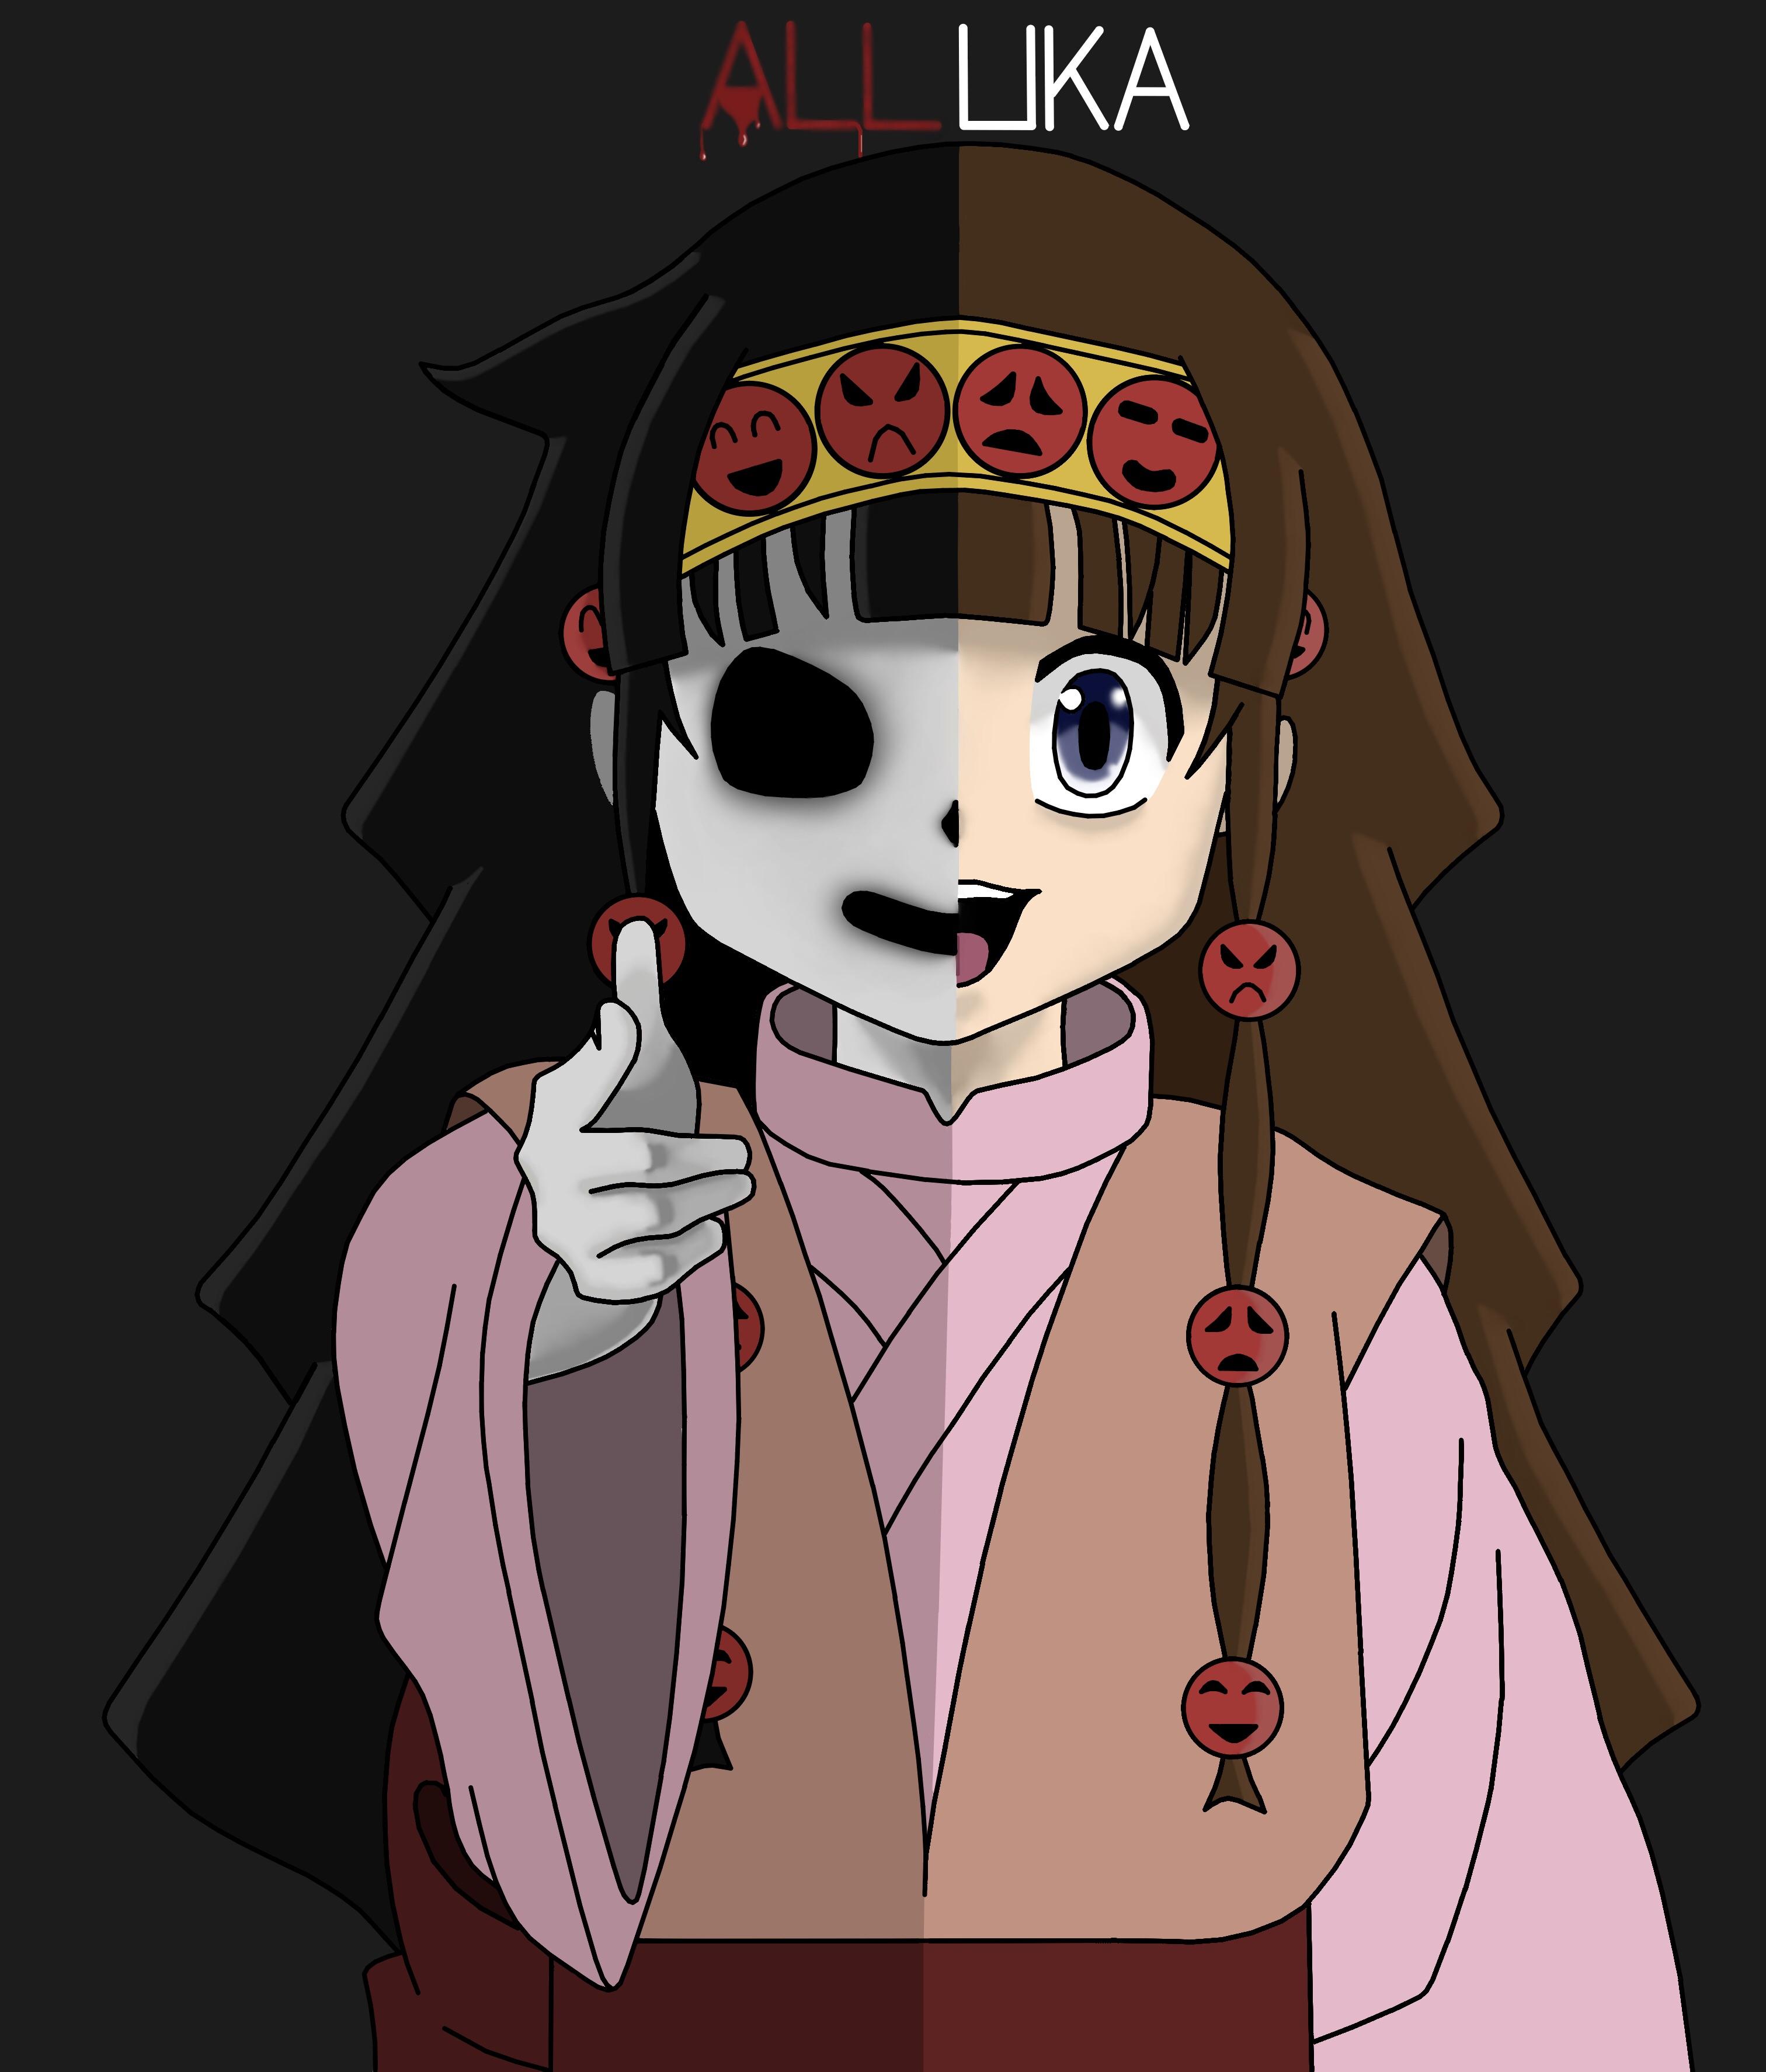 FANART][OC] Alluka from Hunter x Hunter. I draw this a few days ago and decided to digitalized it. I'm proud of the outcome personally